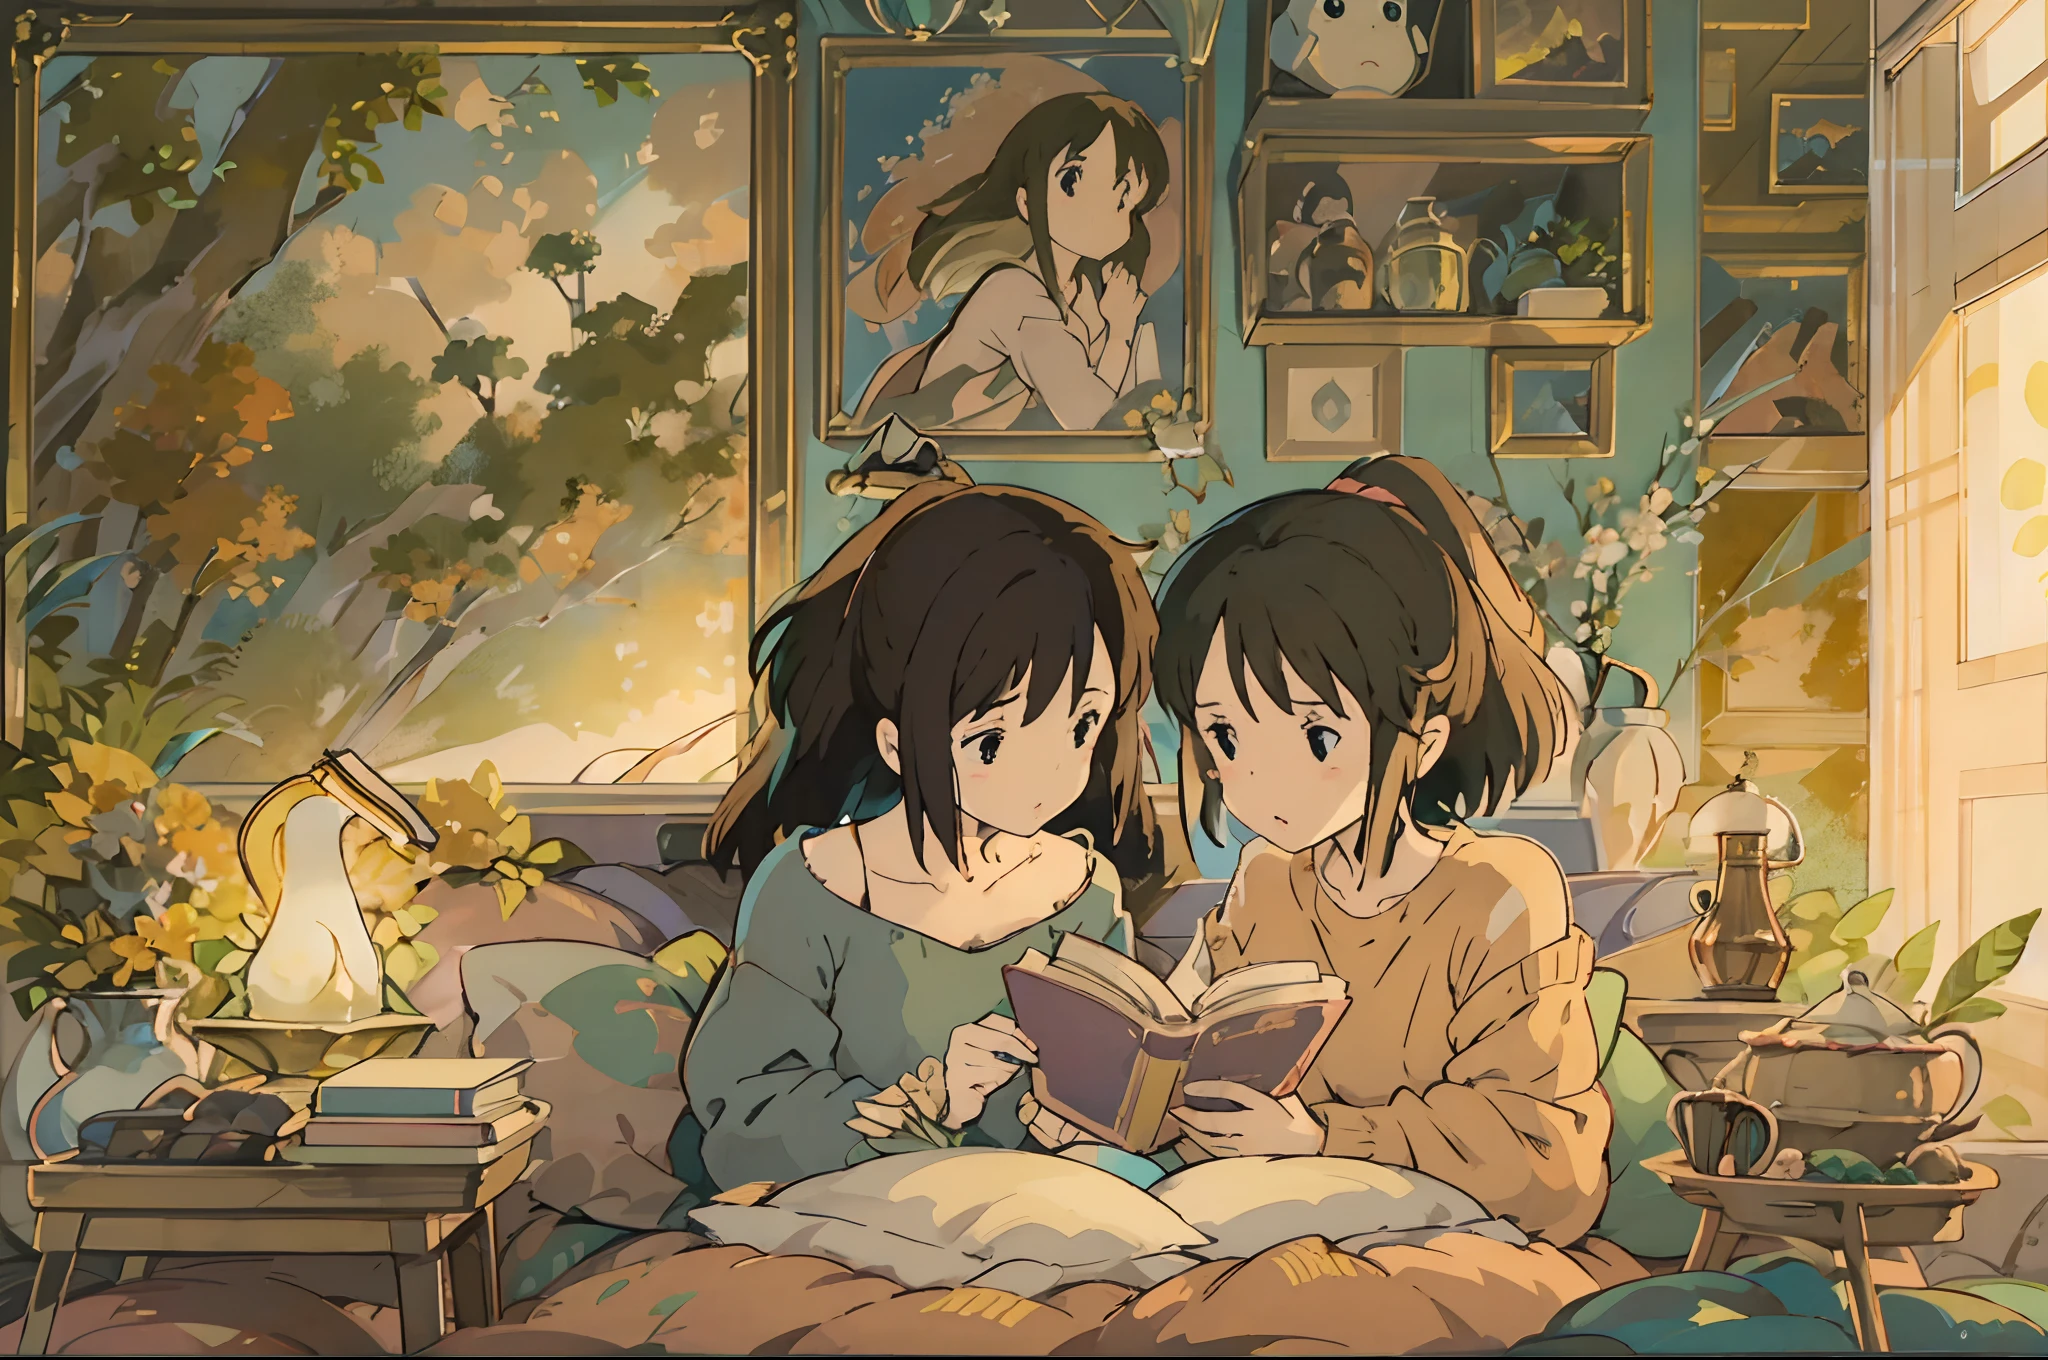 A digital illustration of 2 girls fully engrossed in reading on a comfortable bed, inspired by Hayao Miyazaki's style. The artwork should be filled with enchanting and captivating details, radiating a touch of fantasy. The girls should have beautiful, captivating eyes that are intricately detailed, as well as wonderfully delicate lips. The scene should be visually appealing, featuring a cozy and inviting environment. The illustration should be created using various mediums, such as digital illustration, to enhance the overall visual effect. The attention to detail should be remarkable, ensuring that every element is depicted with utmost precision. The image should possess an extremely high quality, with a resolution of 4k or 8k, and be a masterpiece in its own right. The style of the artwork should capture the essence of Hayao Miyazaki's renowned works, presenting a unique blend of imagination, storytelling, and vibrant visuals. The colors used should be warm and inviting, creating a soothing and cozy atmosphere. The lighting should be skillfully rendered, illuminating the scene in a soft and gentle manner. Overall, the illustration should transport viewers into a world of wonder and magic, where they can fully immerse themselves in the joy of reading. The combination of Miyazaki's iconic style, enchanting details, warm tones, and a hint of fantasy should come together to create an awe-inspiring and captivating piece of art.